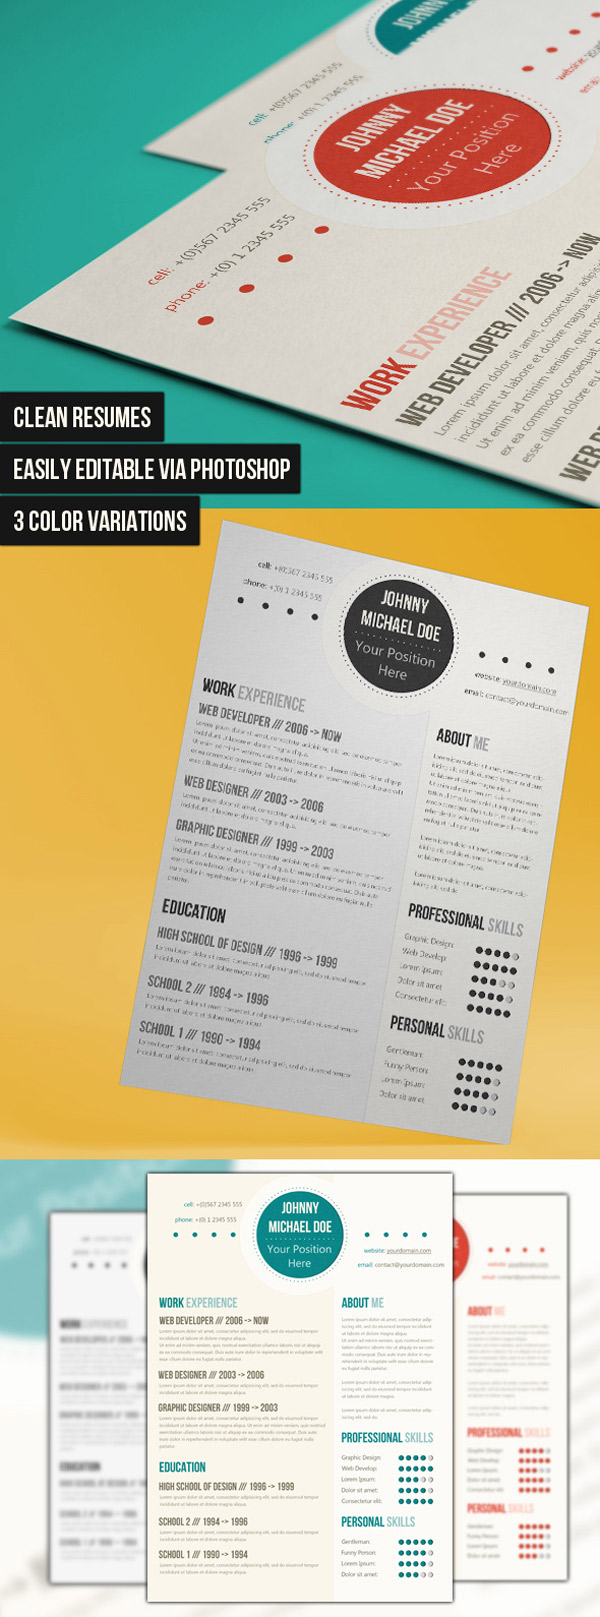 25-Awesome-CV-Templates-and-Examples-4